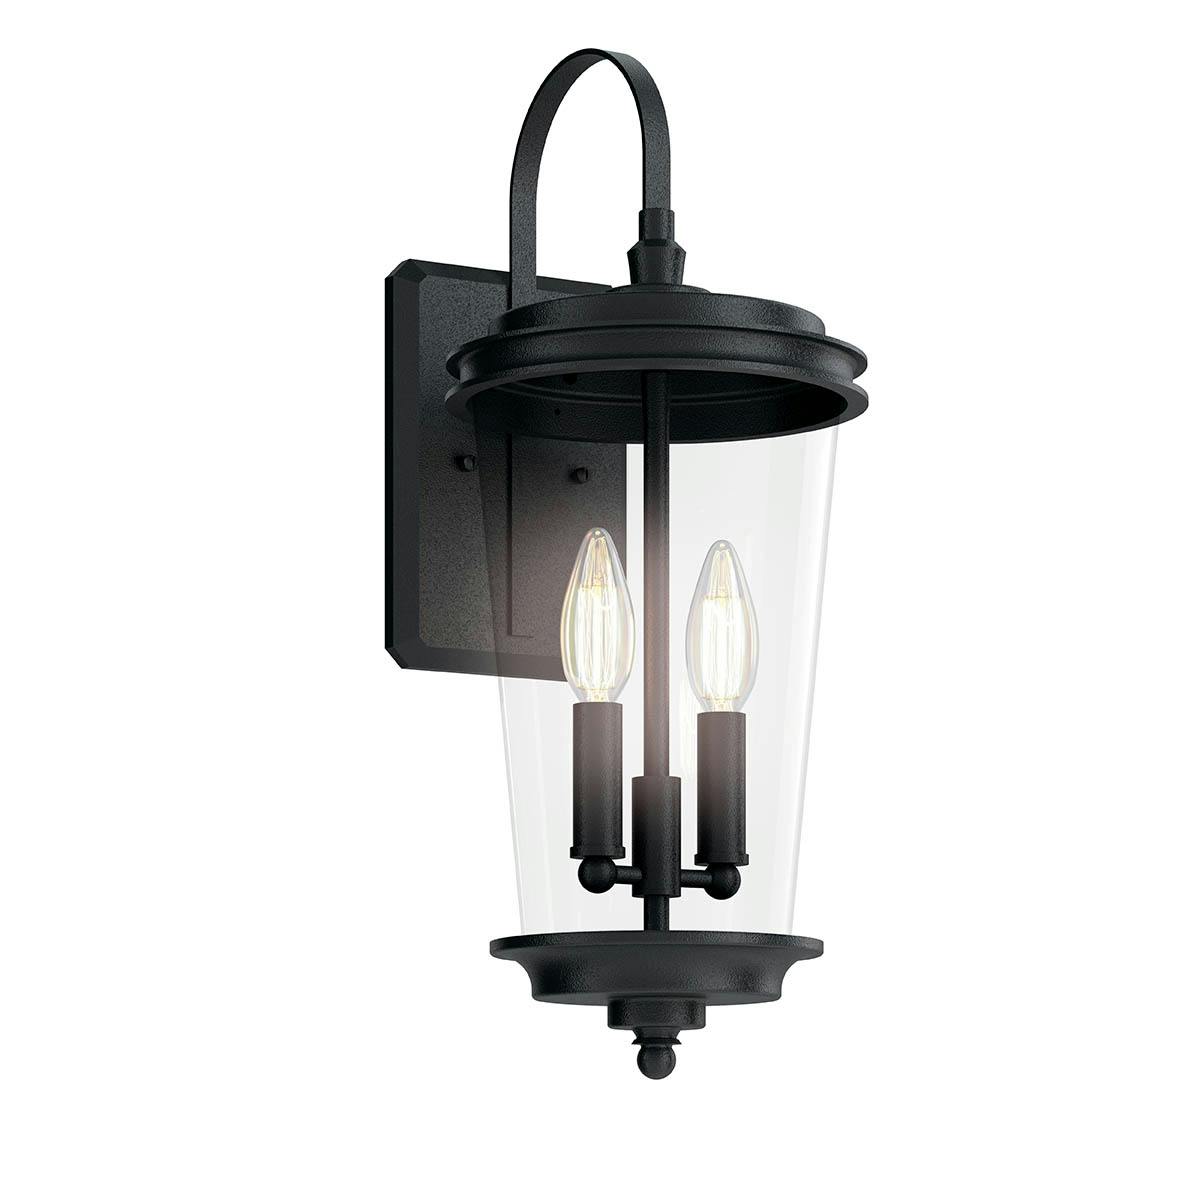 The Holmden 21" 2 Light Outdoor Wall Light Textured Black on a white background